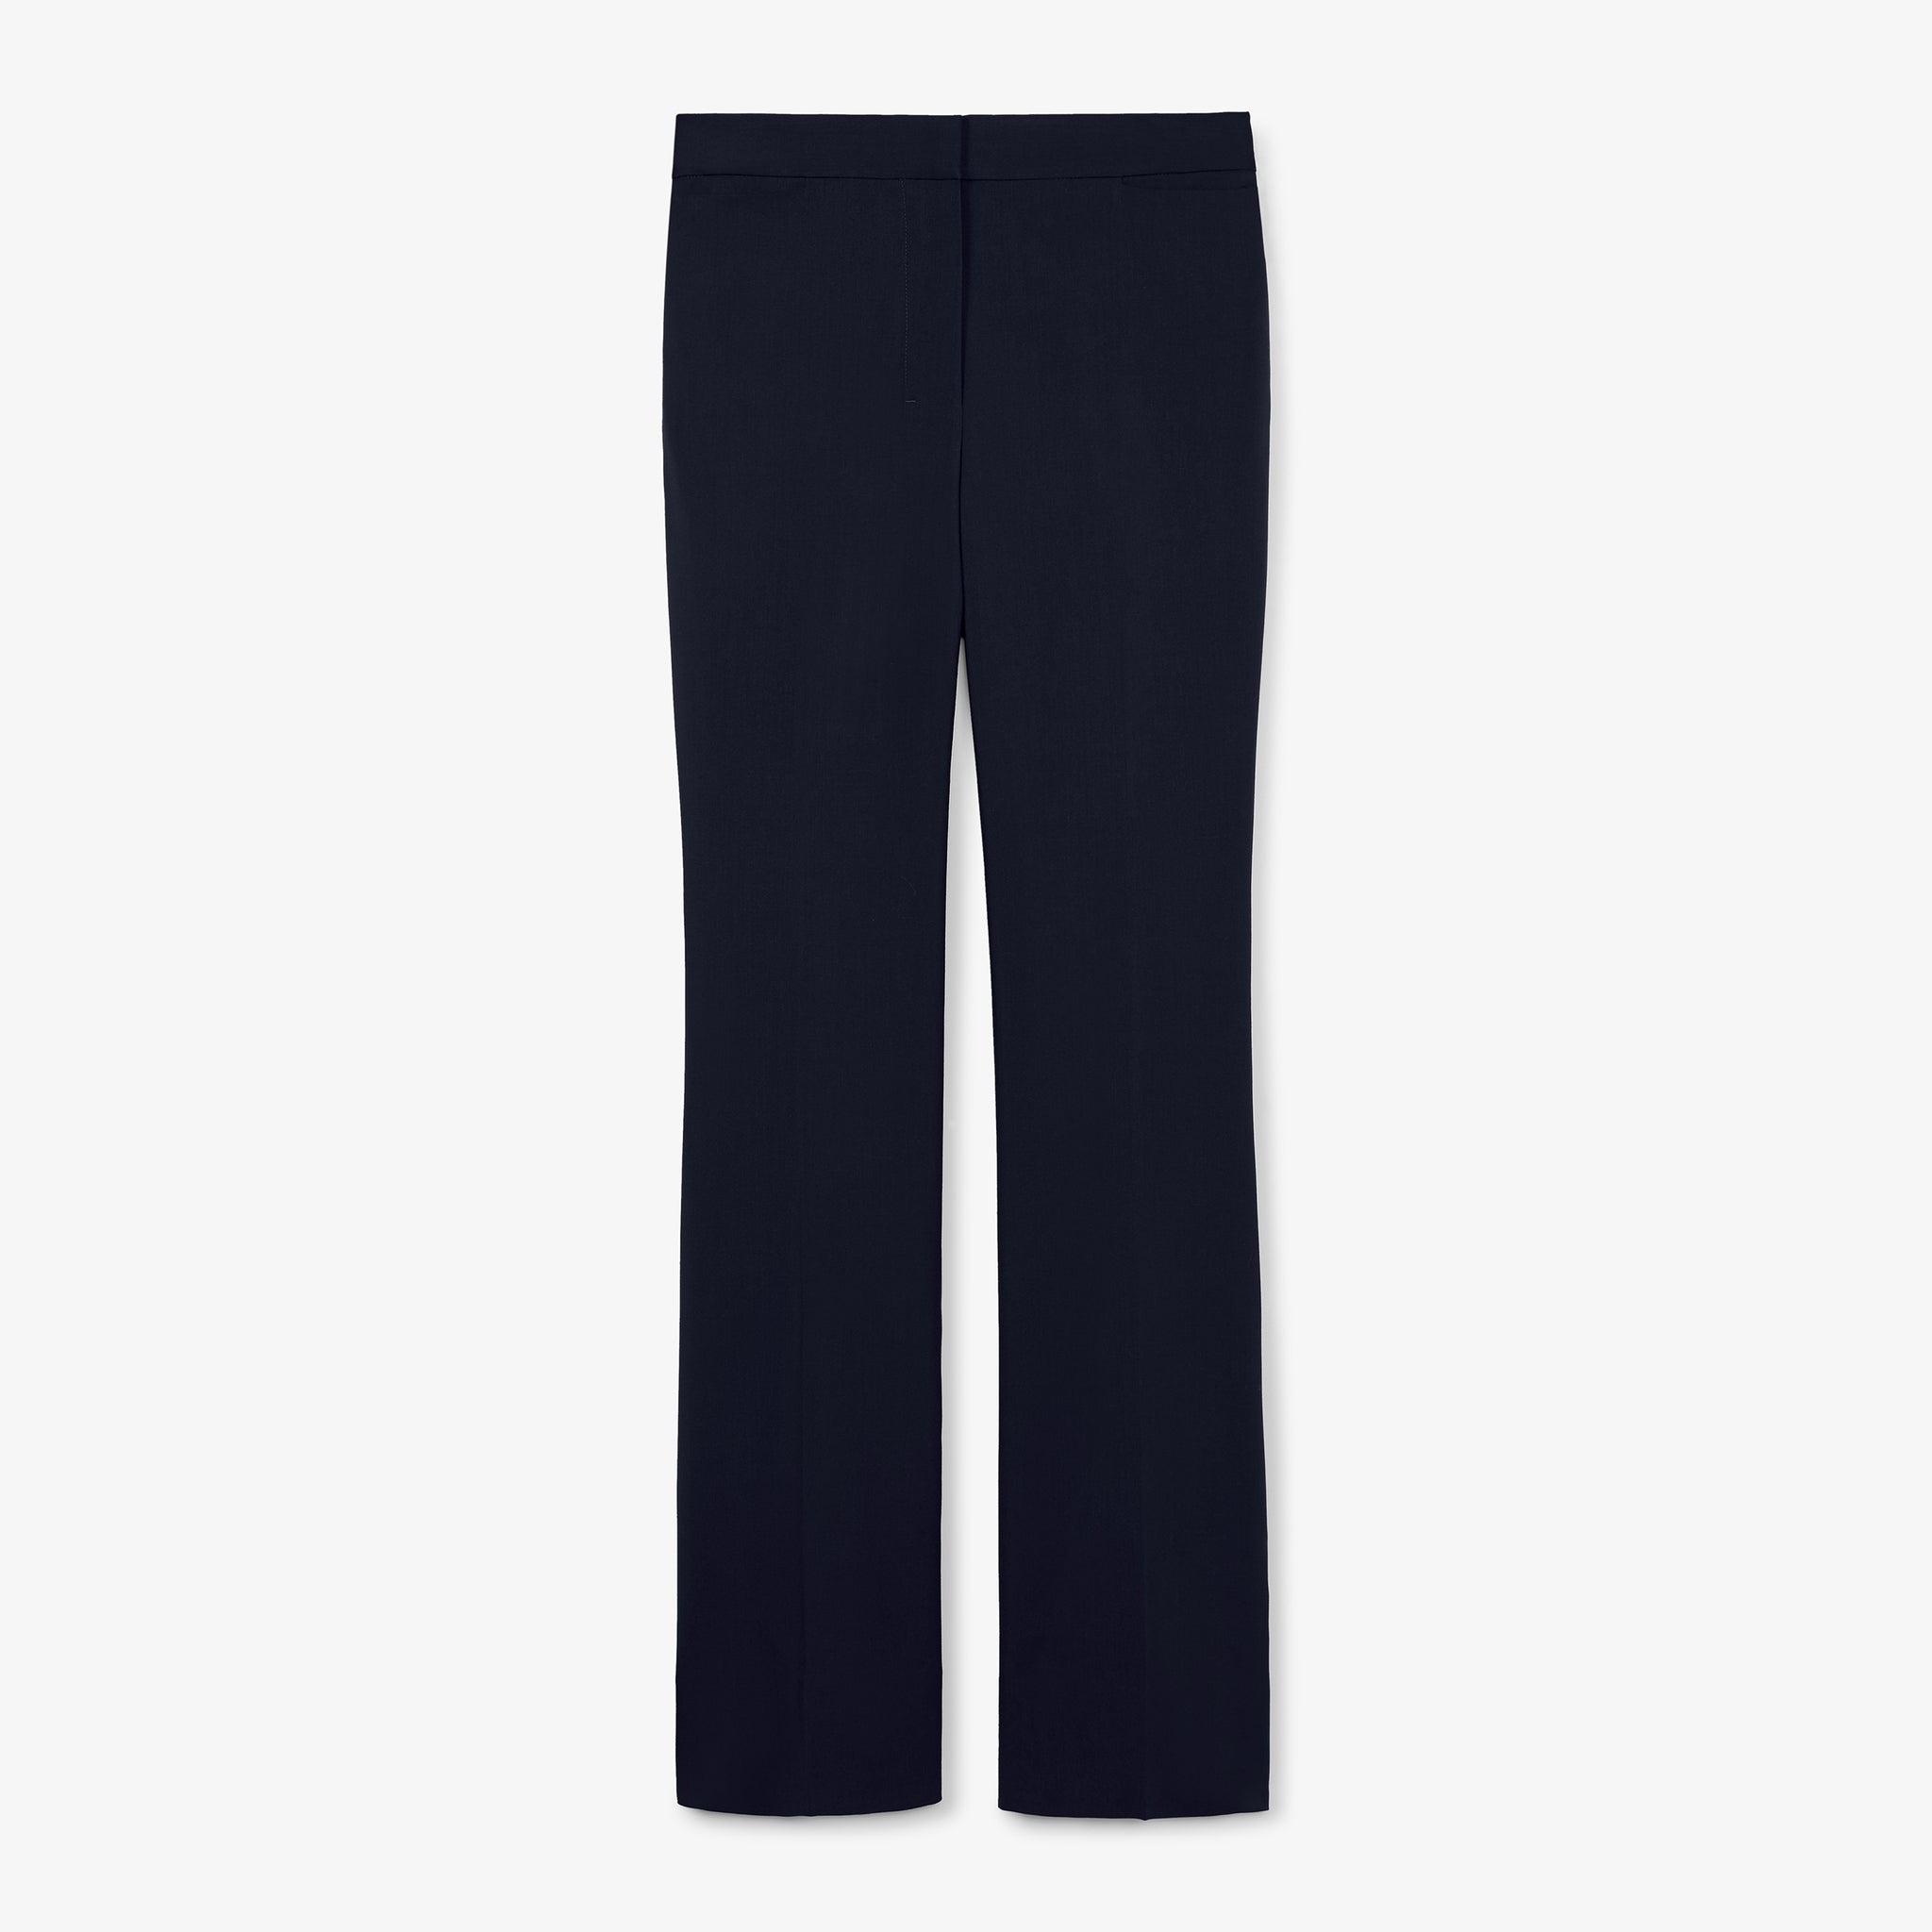 Packshot image of the Horton pant in Galaxy Blue